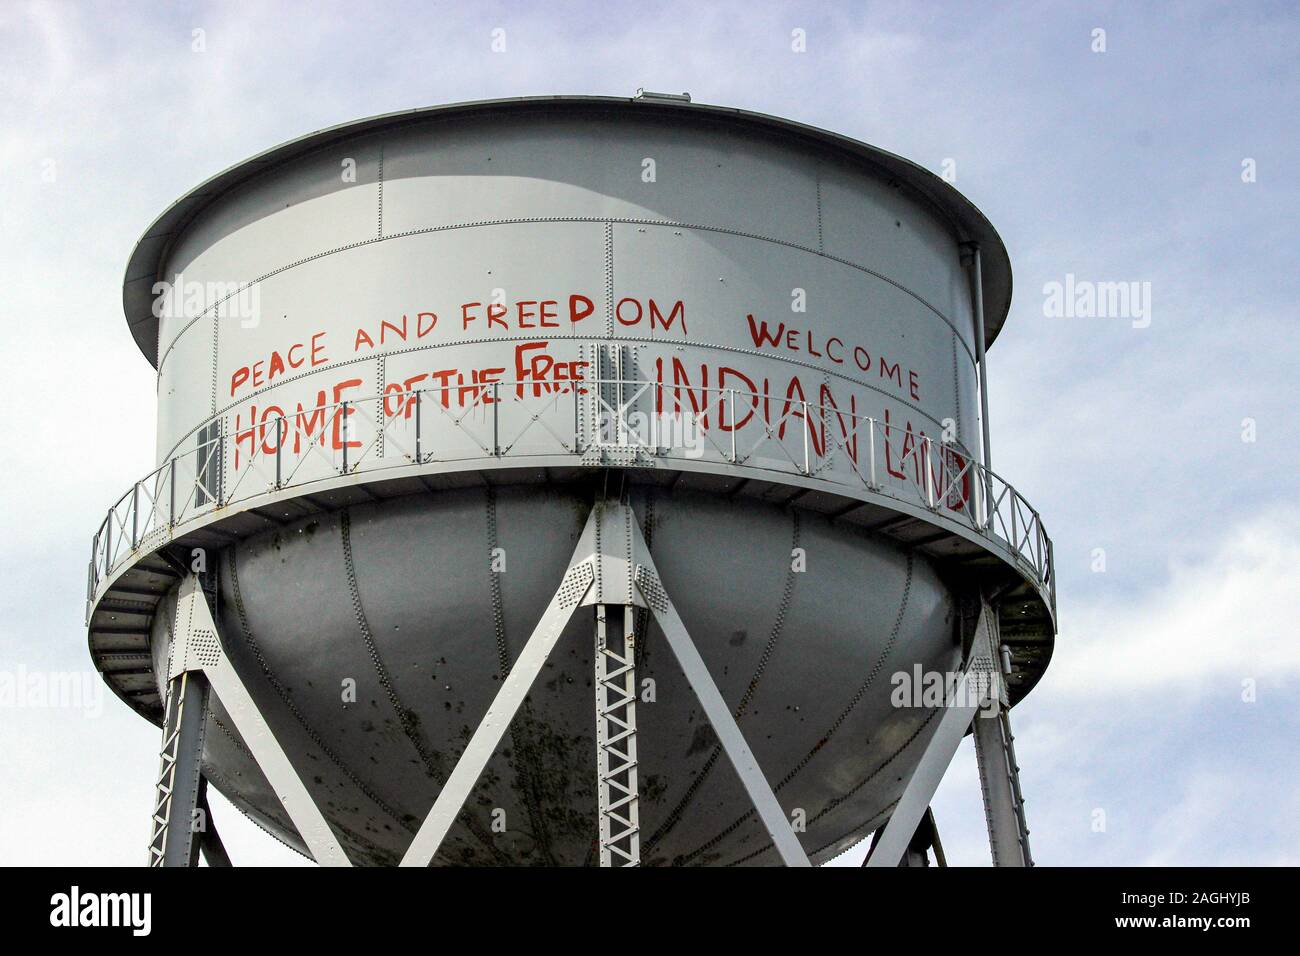 Preserved graffiti on water tower from the occupation of Alcatraz Island (1969-1970). Home of the free Indian land. San Francisco, United States. Stock Photo